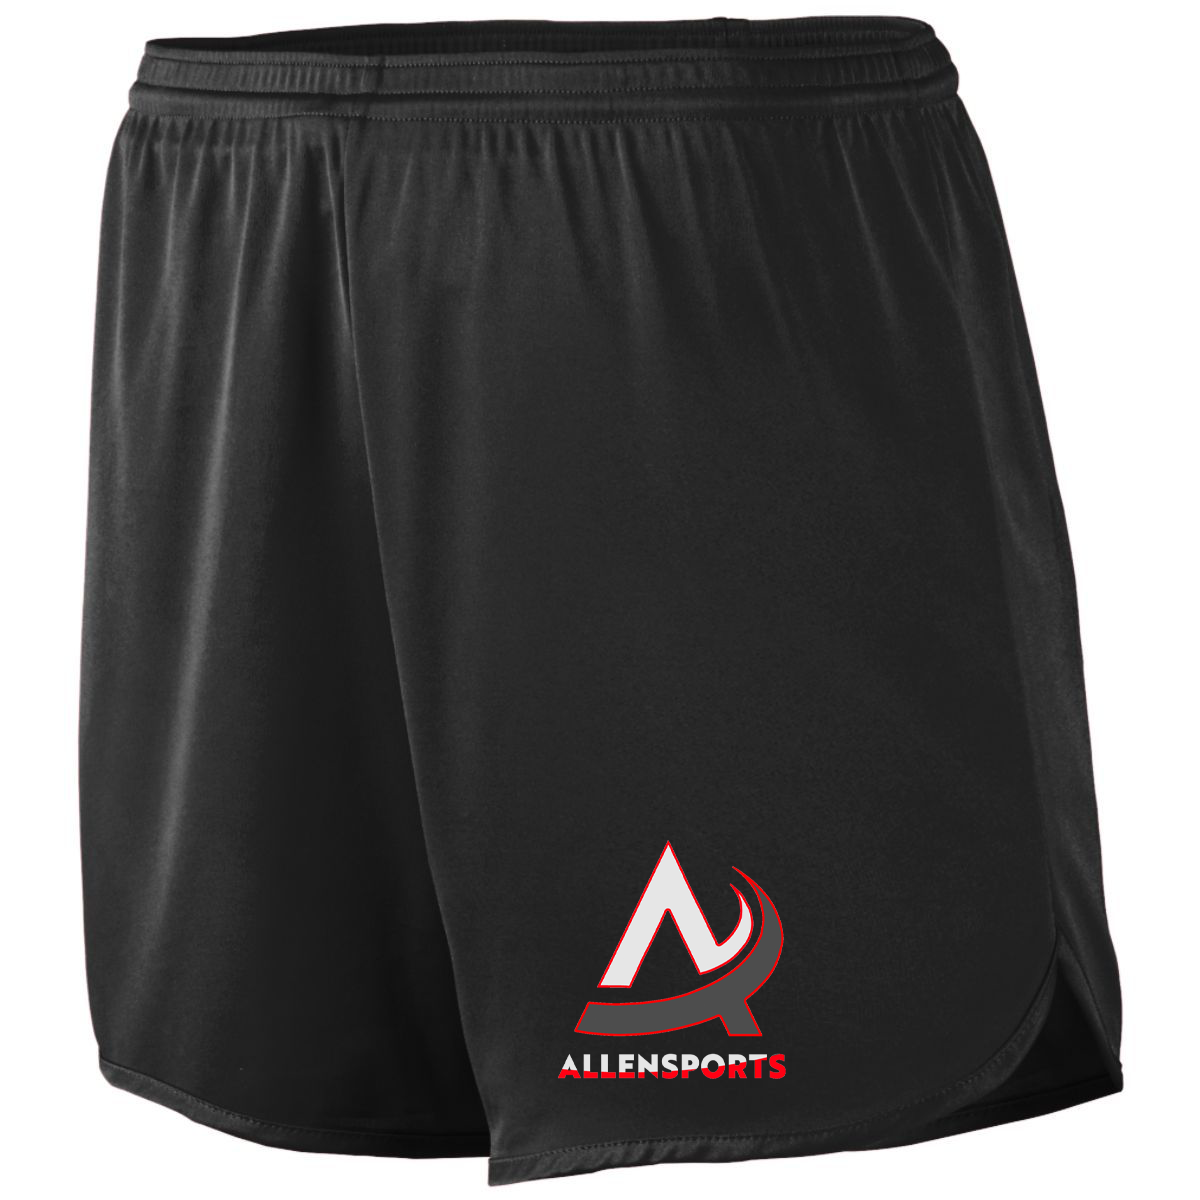 AllenSports Accelerate Shorts